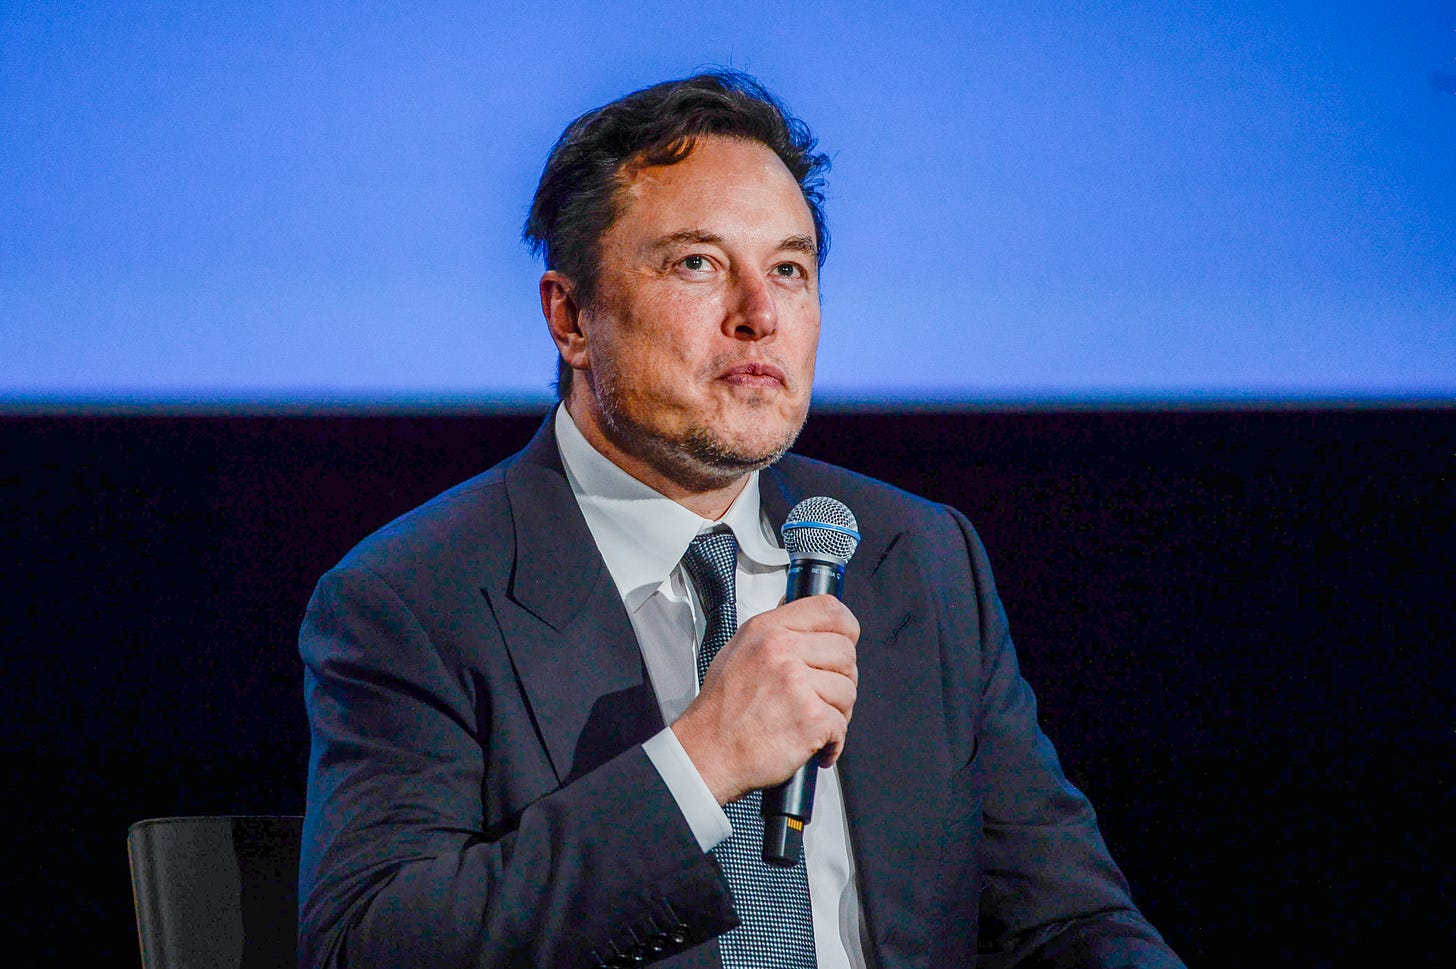 Elon Musk's text exchange with his banker revealed the tech tycoon wanted to 'slow down' his Twitter deal amid World War III fears